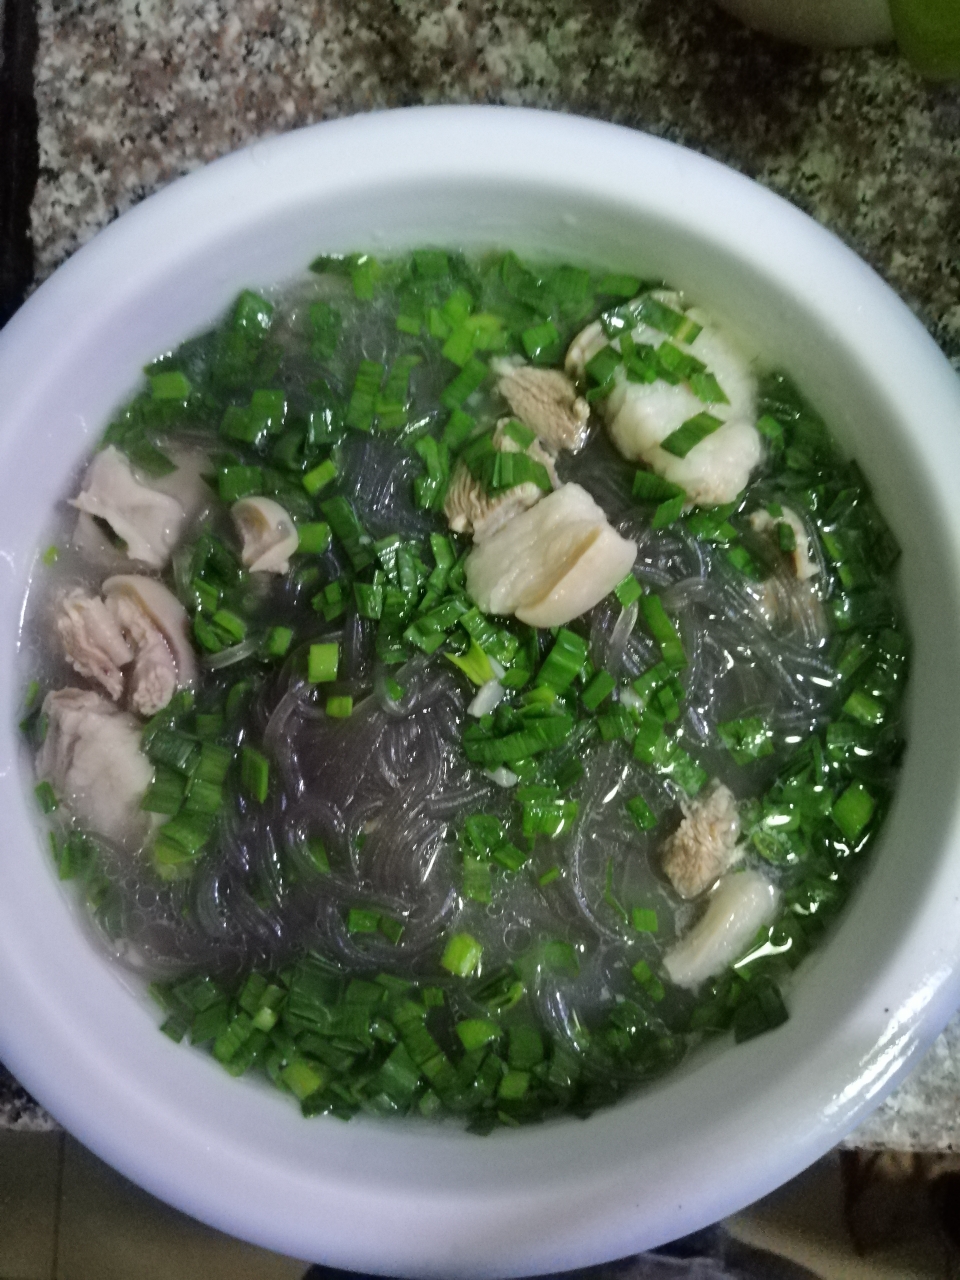 
The practice of hotpot soup vermicelli made from bean starch, how is hotpot soup vermicelli made from bean starch done delicious